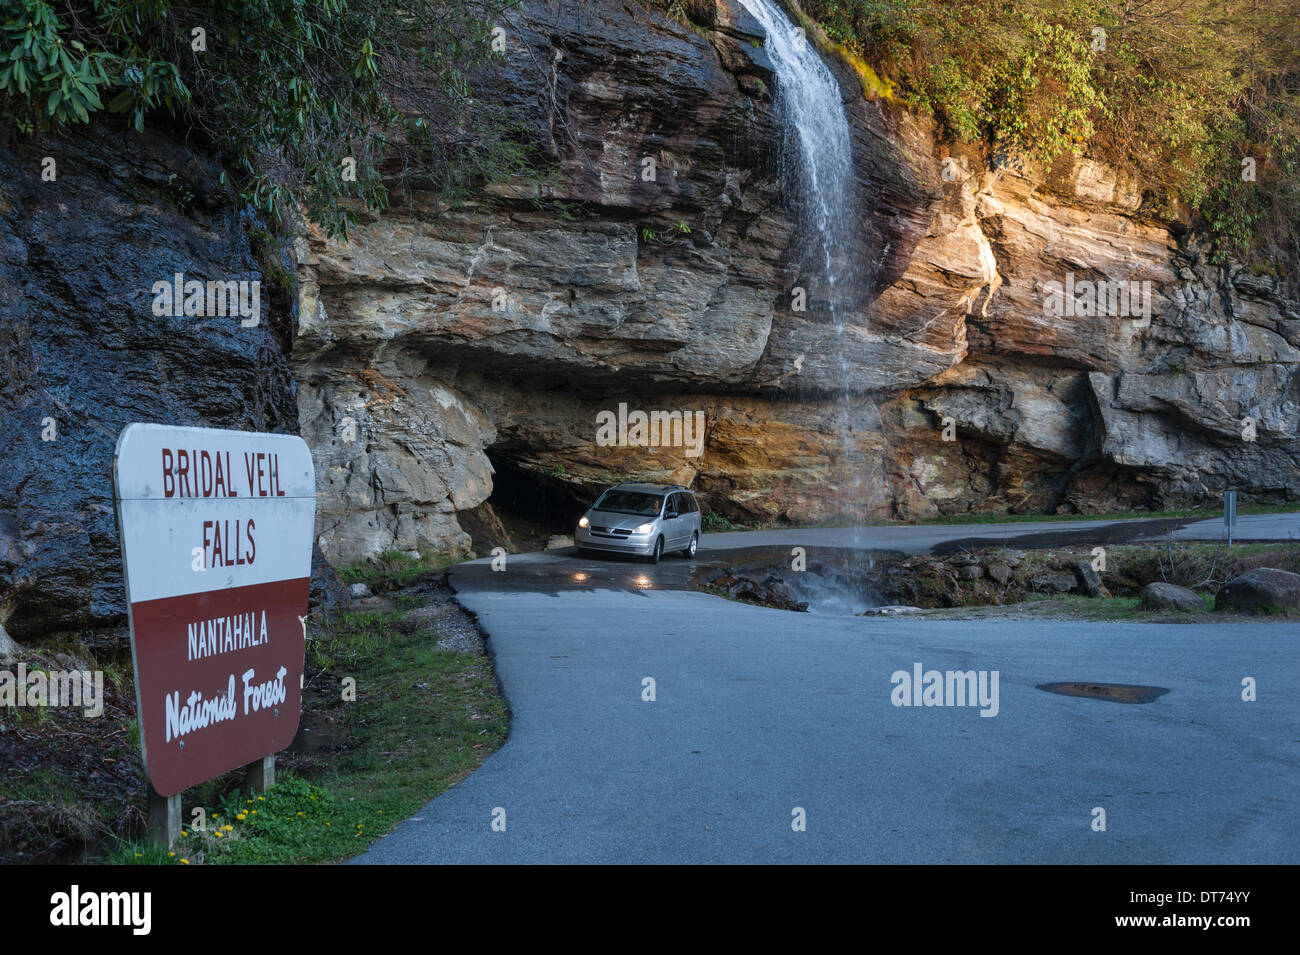 Bridal Veil Falls near Highlands, NC, provides an opportunity for drivers to drive behind a mountain waterfall along Highway 64. (USA) Stock Photo